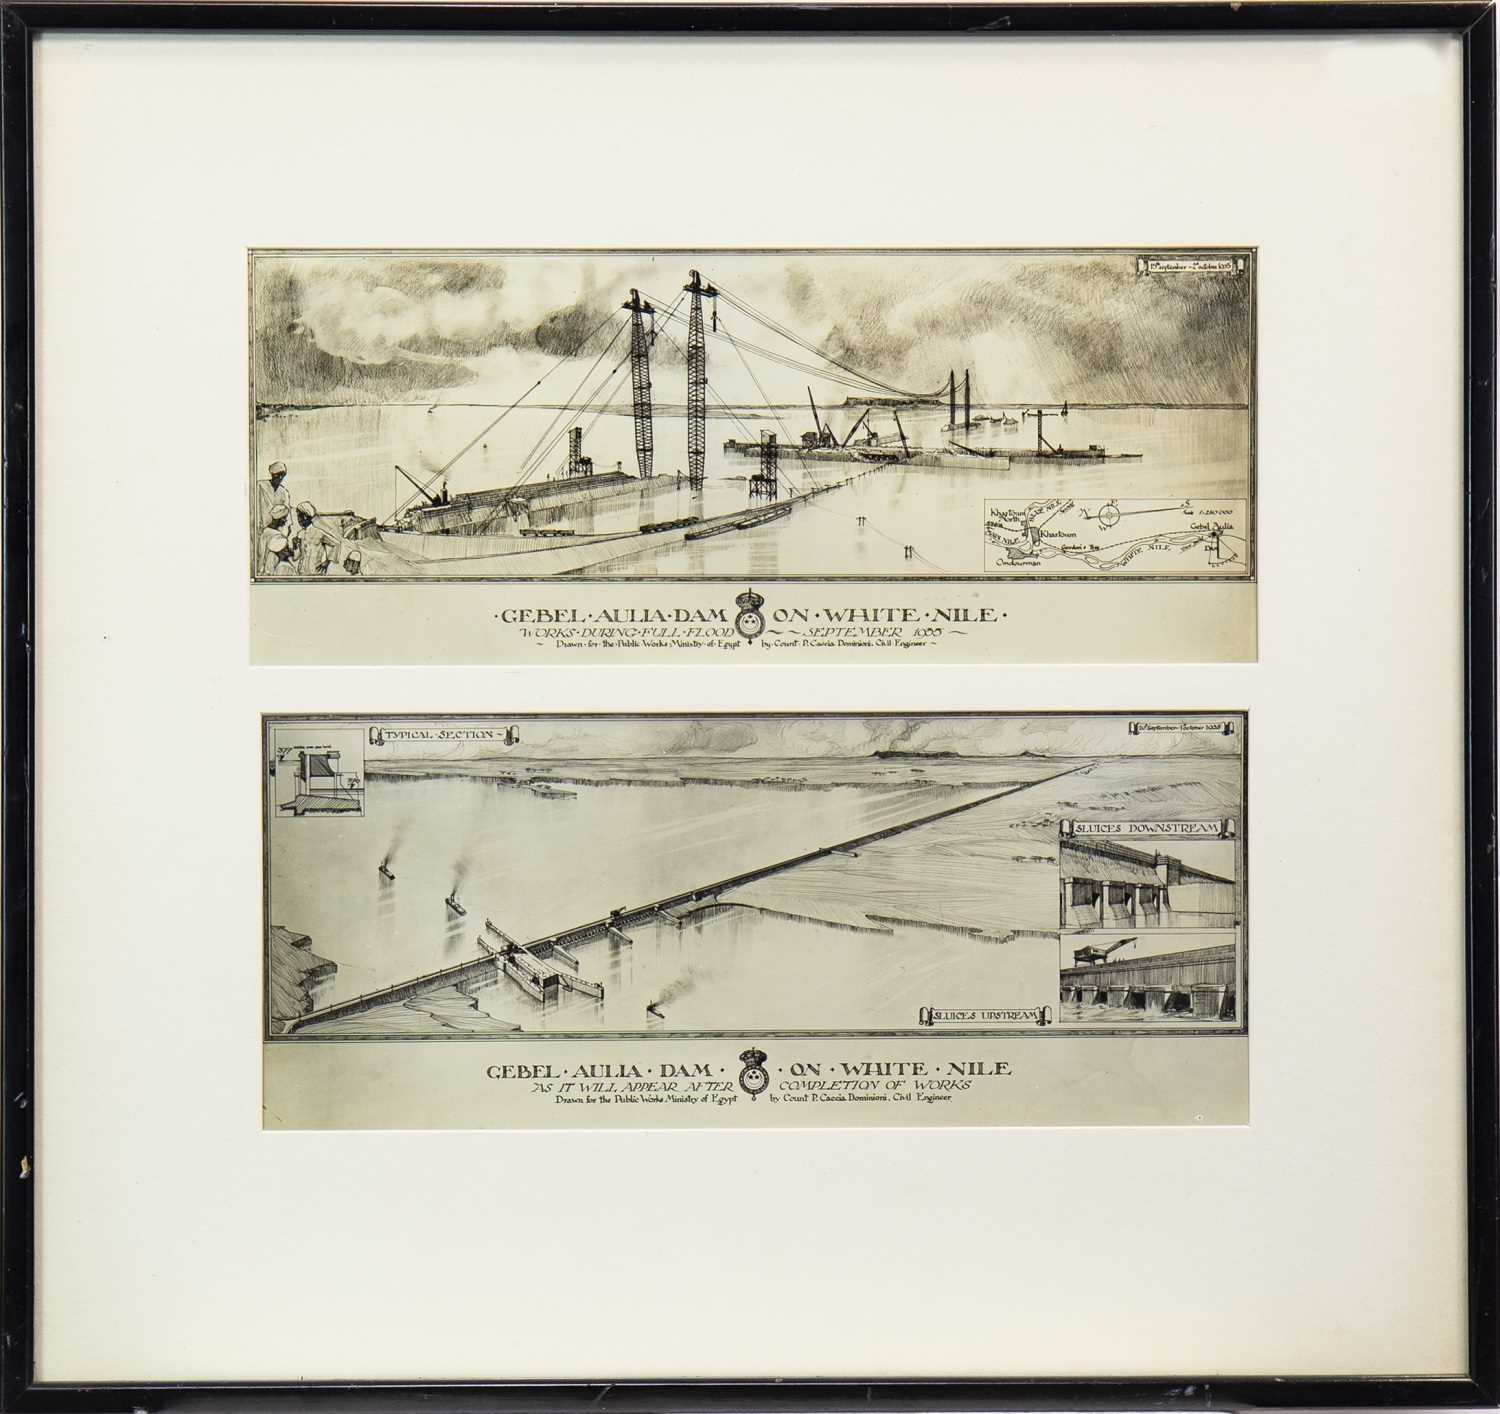 Lot 718 - A SERIES OF ETCHINGS DEPICTING VARIOUS EGYPTIAN SCENES